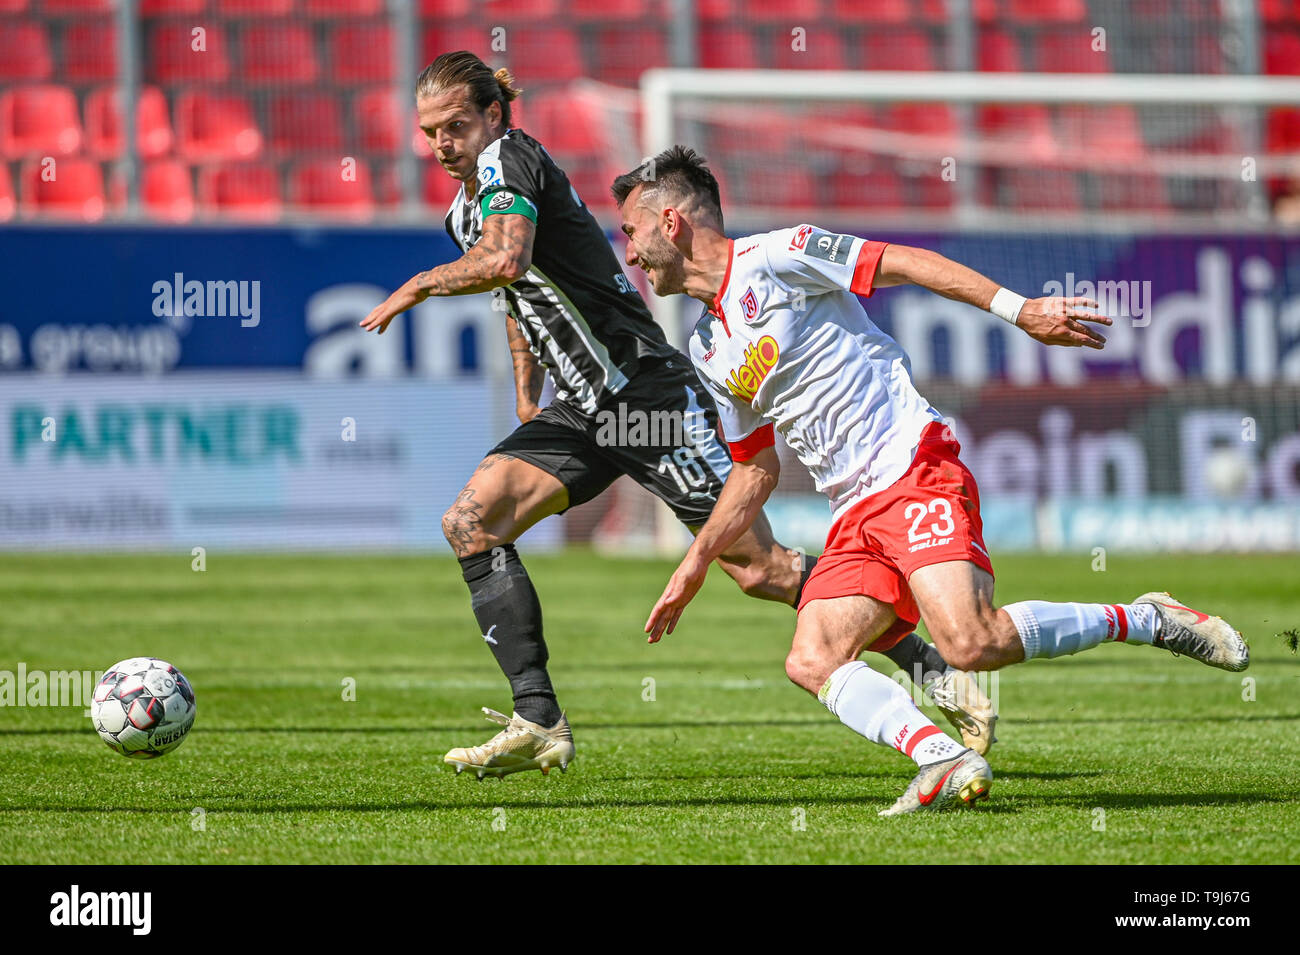 Regensburg, Germany. 19th May, 2019. Soccer: 2nd Bundesliga, Jahn Regensburg - SV Sandhausen, 34th matchday in the Continental Arena. Dennis Diekmeier from Sandhausen (l) and Sargis Adamyan from Regensburg fight for the ball. Credit: Armin Weigel/dpa - IMPORTANT NOTE: In accordance with the requirements of the DFL Deutsche Fußball Liga or the DFB Deutscher Fußball-Bund, it is prohibited to use or have used photographs taken in the stadium and/or the match in the form of sequence images and/or video-like photo sequences./dpa/Alamy Live News Stock Photo